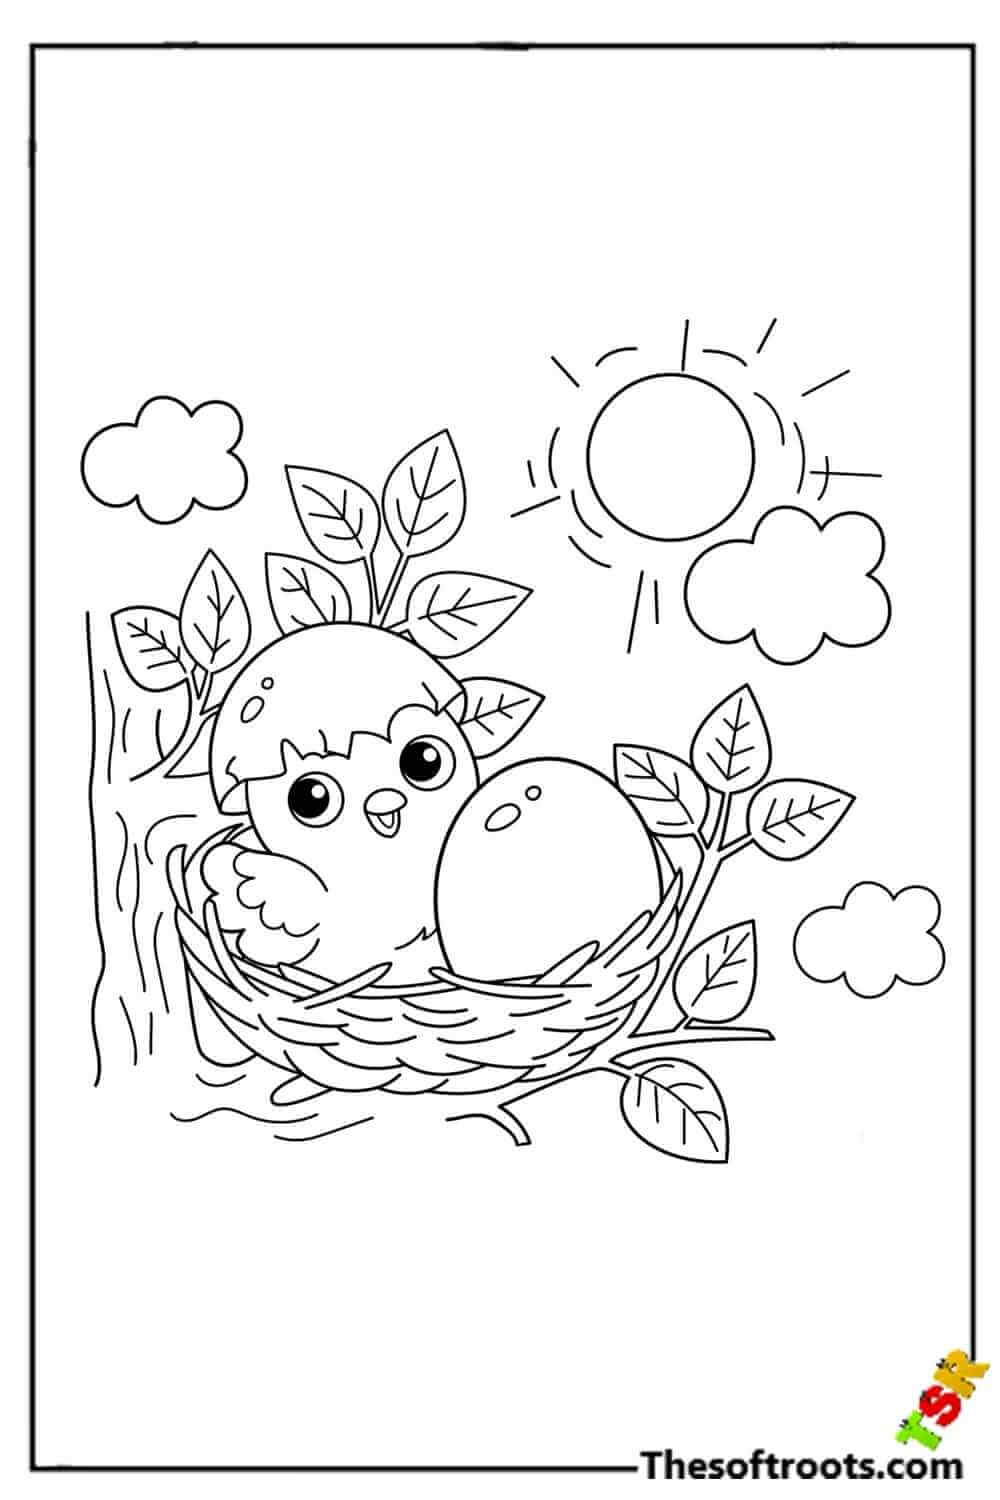 Nest Coloring pages